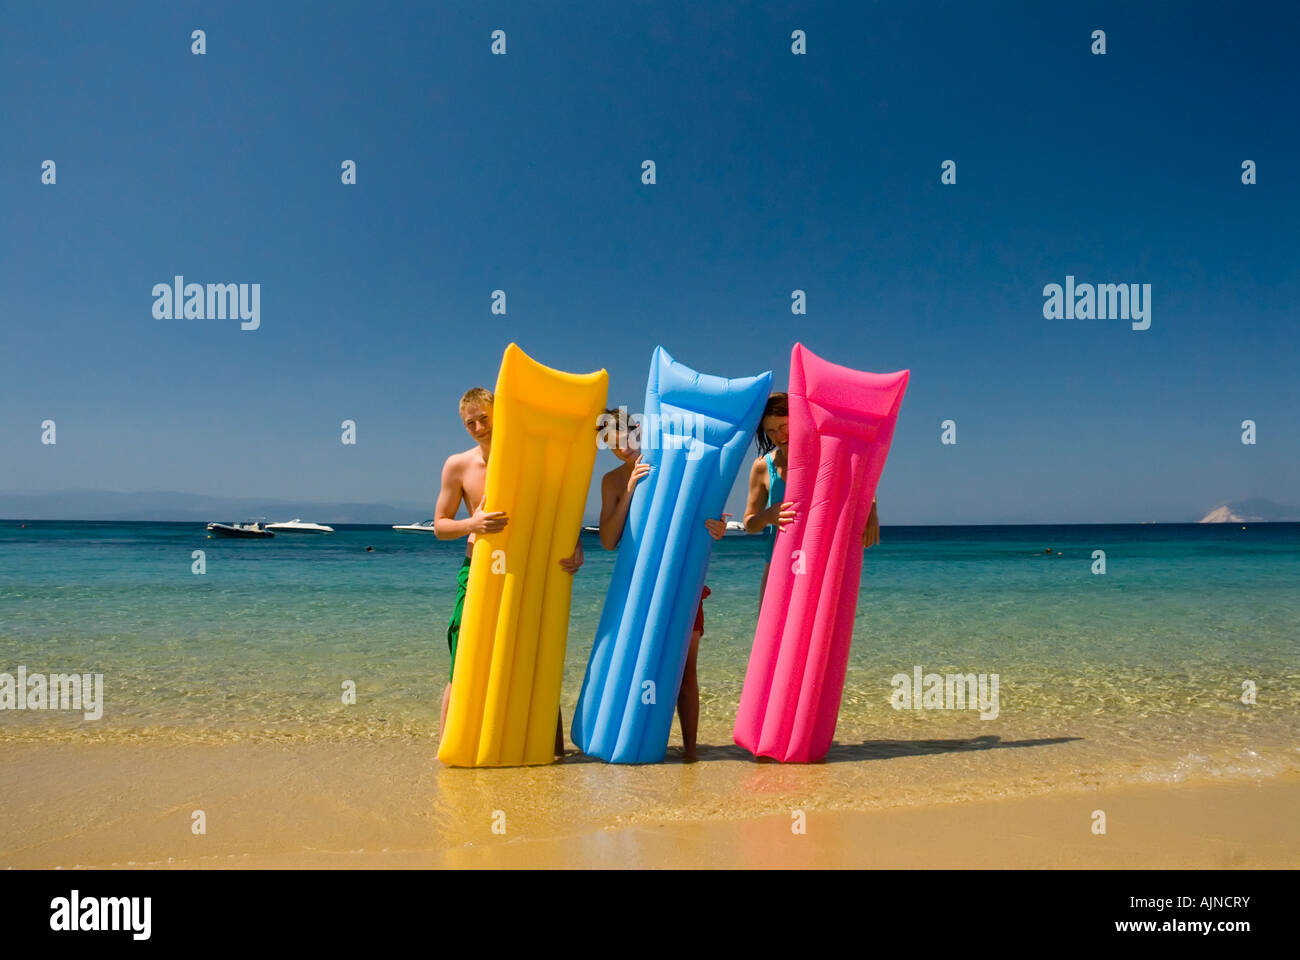 Three people looking out from behind colourful li los inflatable airbeds sandy beach blue sea and sky Mediterranean Greece Stock Photo